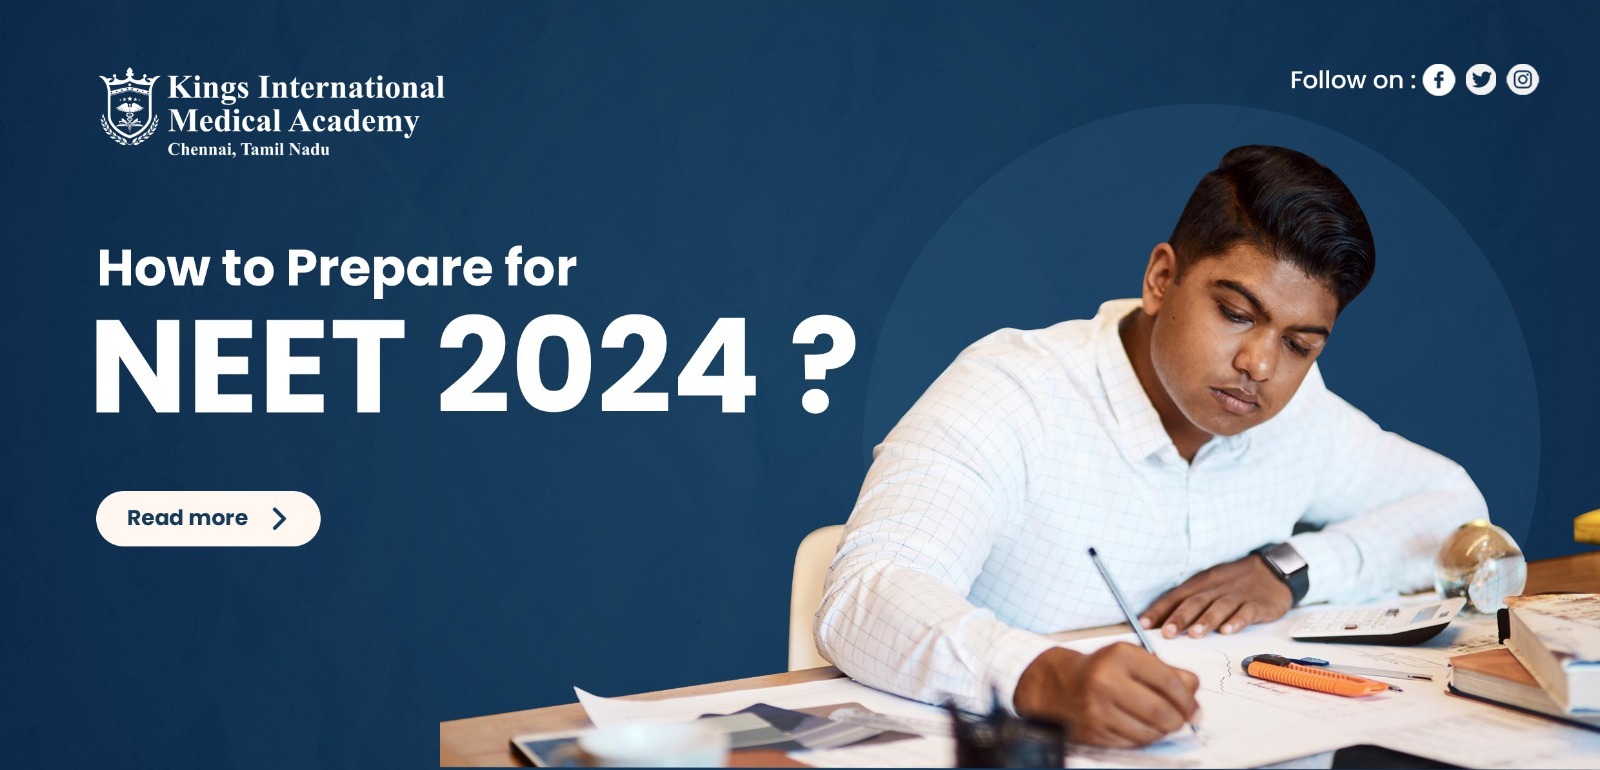 How to Prepare for NEET 2024